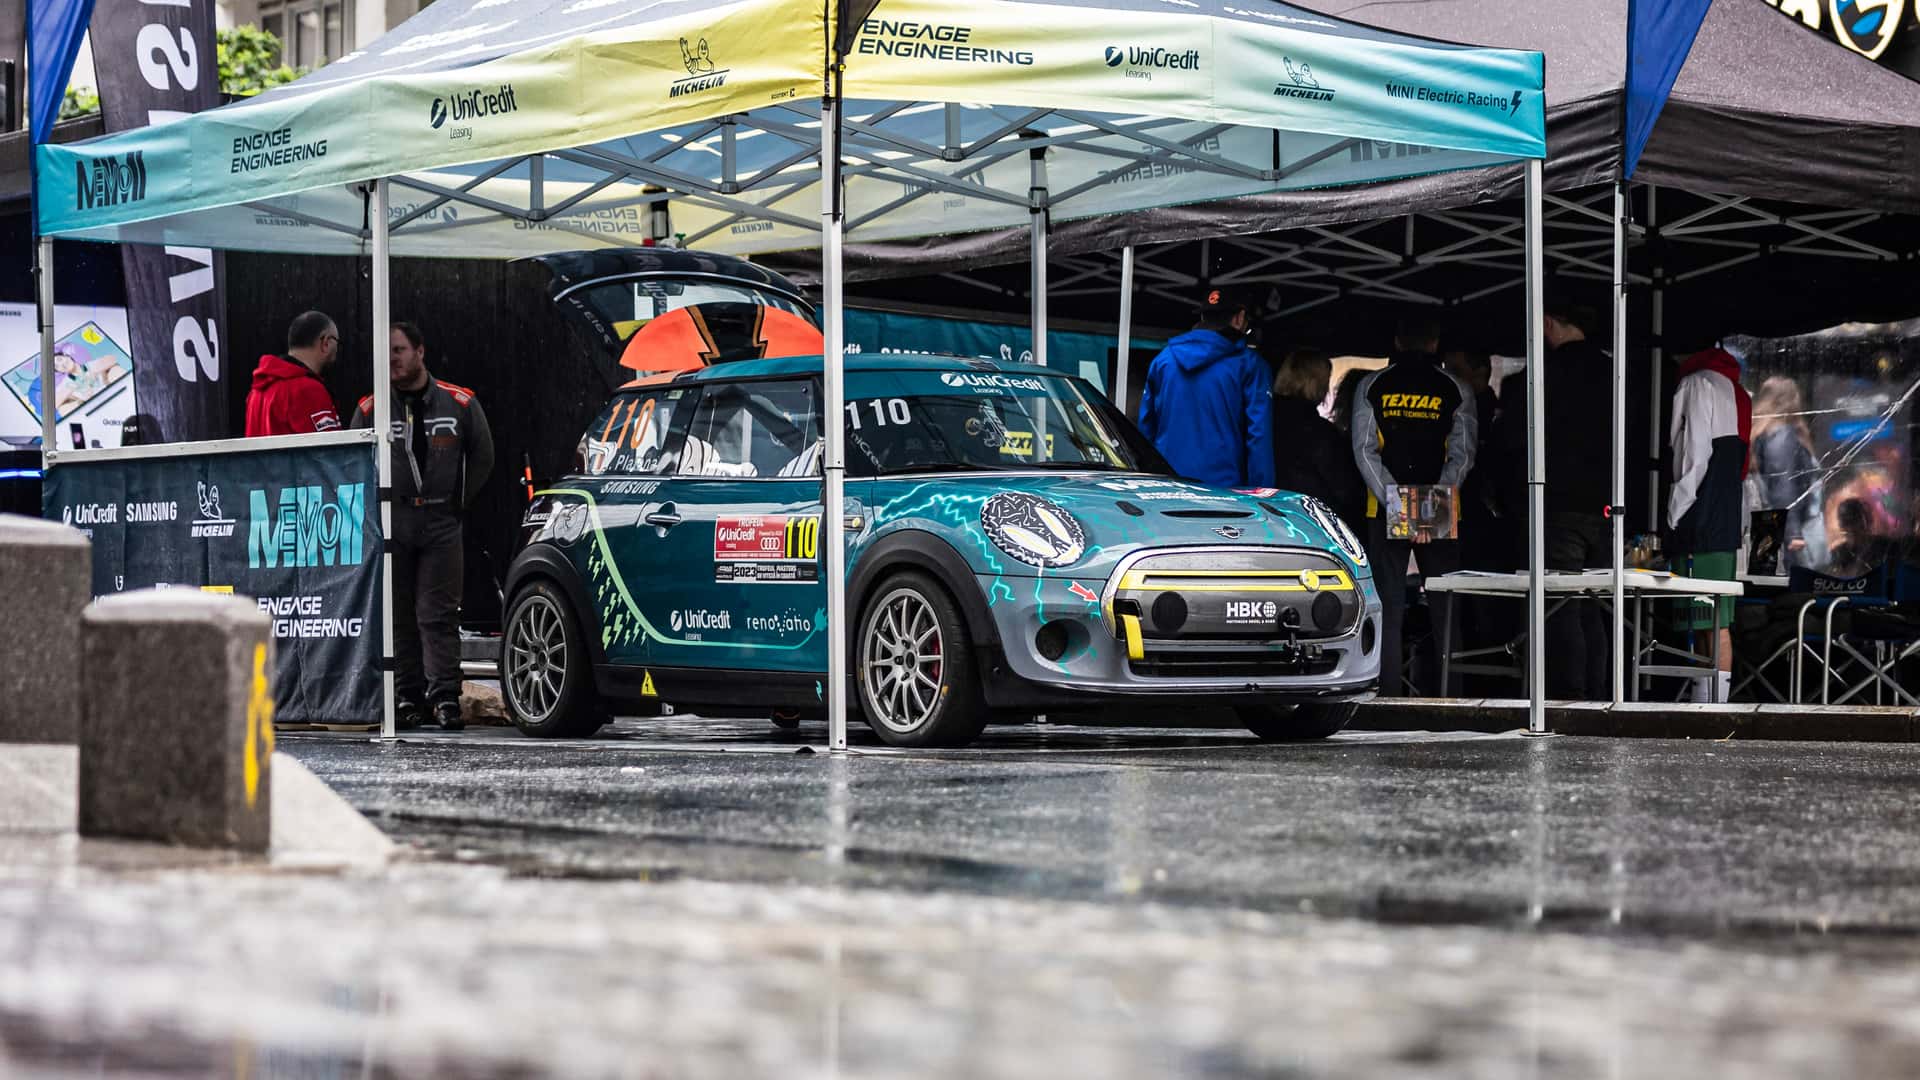 this mostly stock electric mini punched above its weight. it’s now a street rally champion